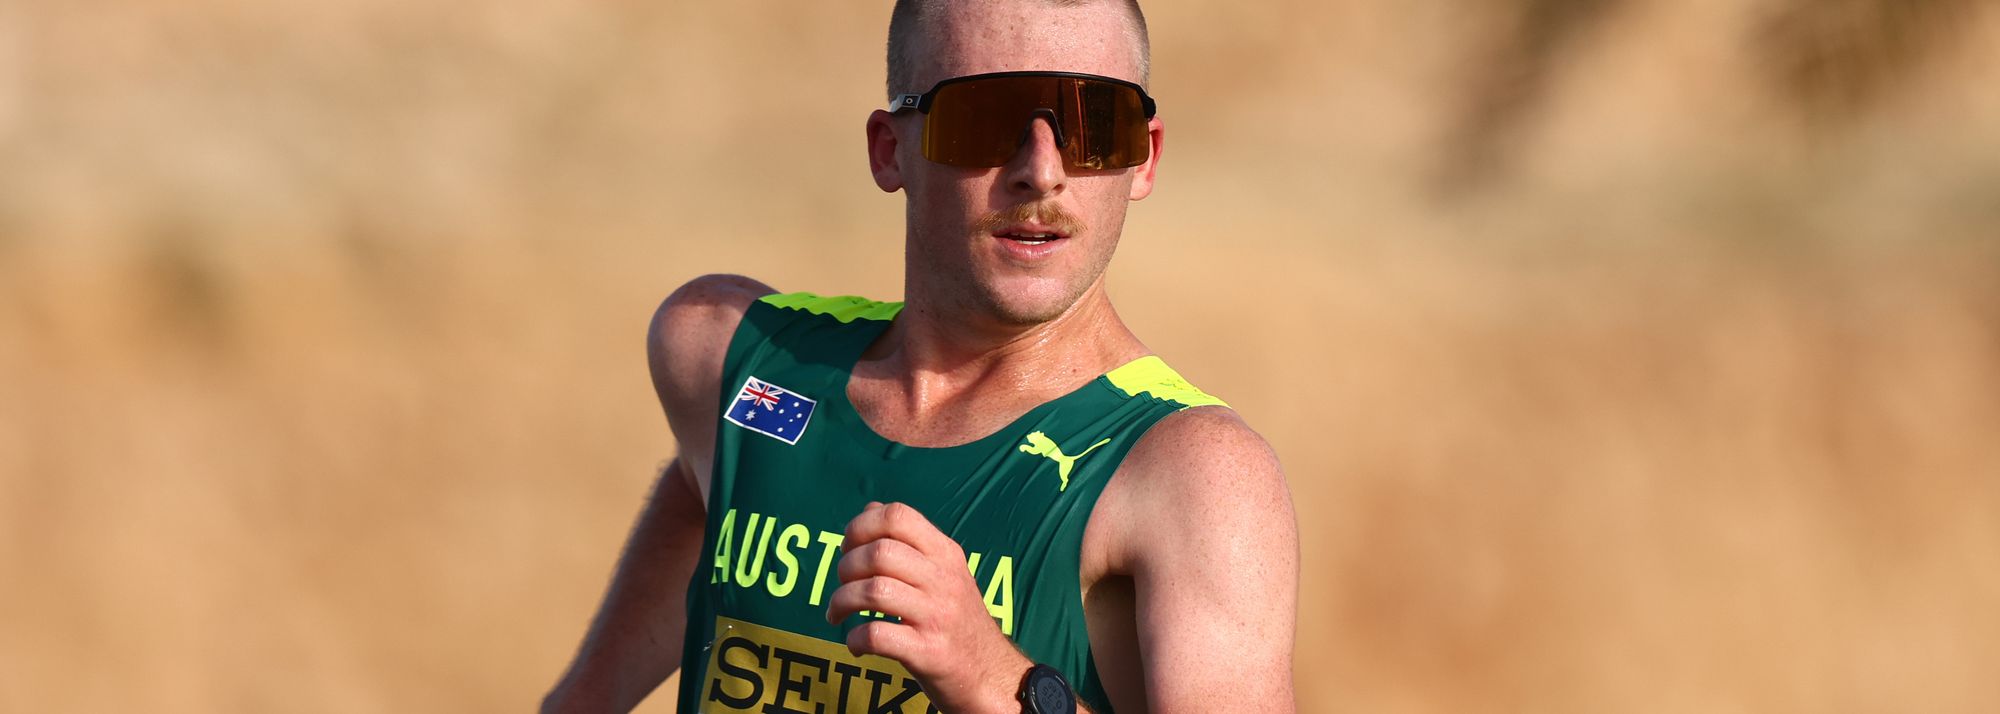 A 1:18:46 20km race walk win in Nomi means Declan Tingay is now sure of his place in the pack